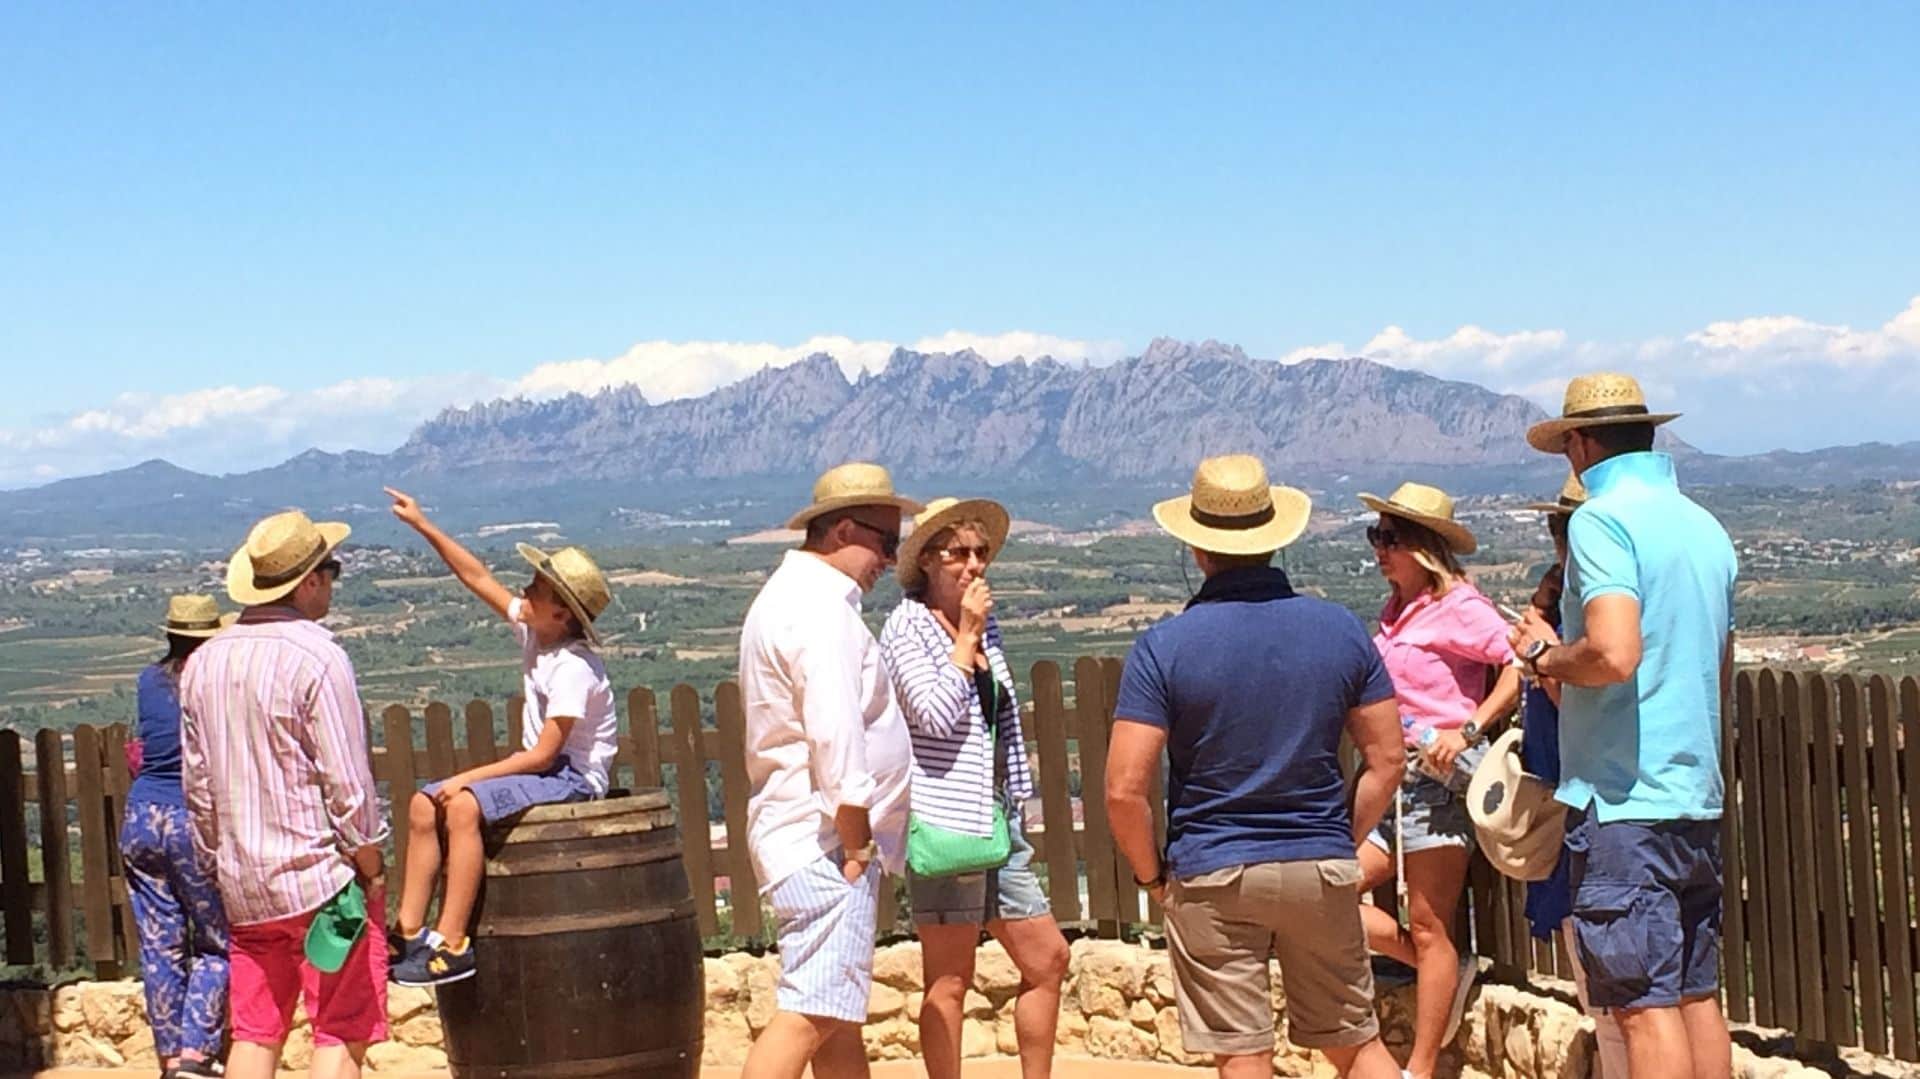 Montserrat Tour with Monastery visit and Wine Tasting in Penedés Small Group Day Tour - In out Barcelona Tours